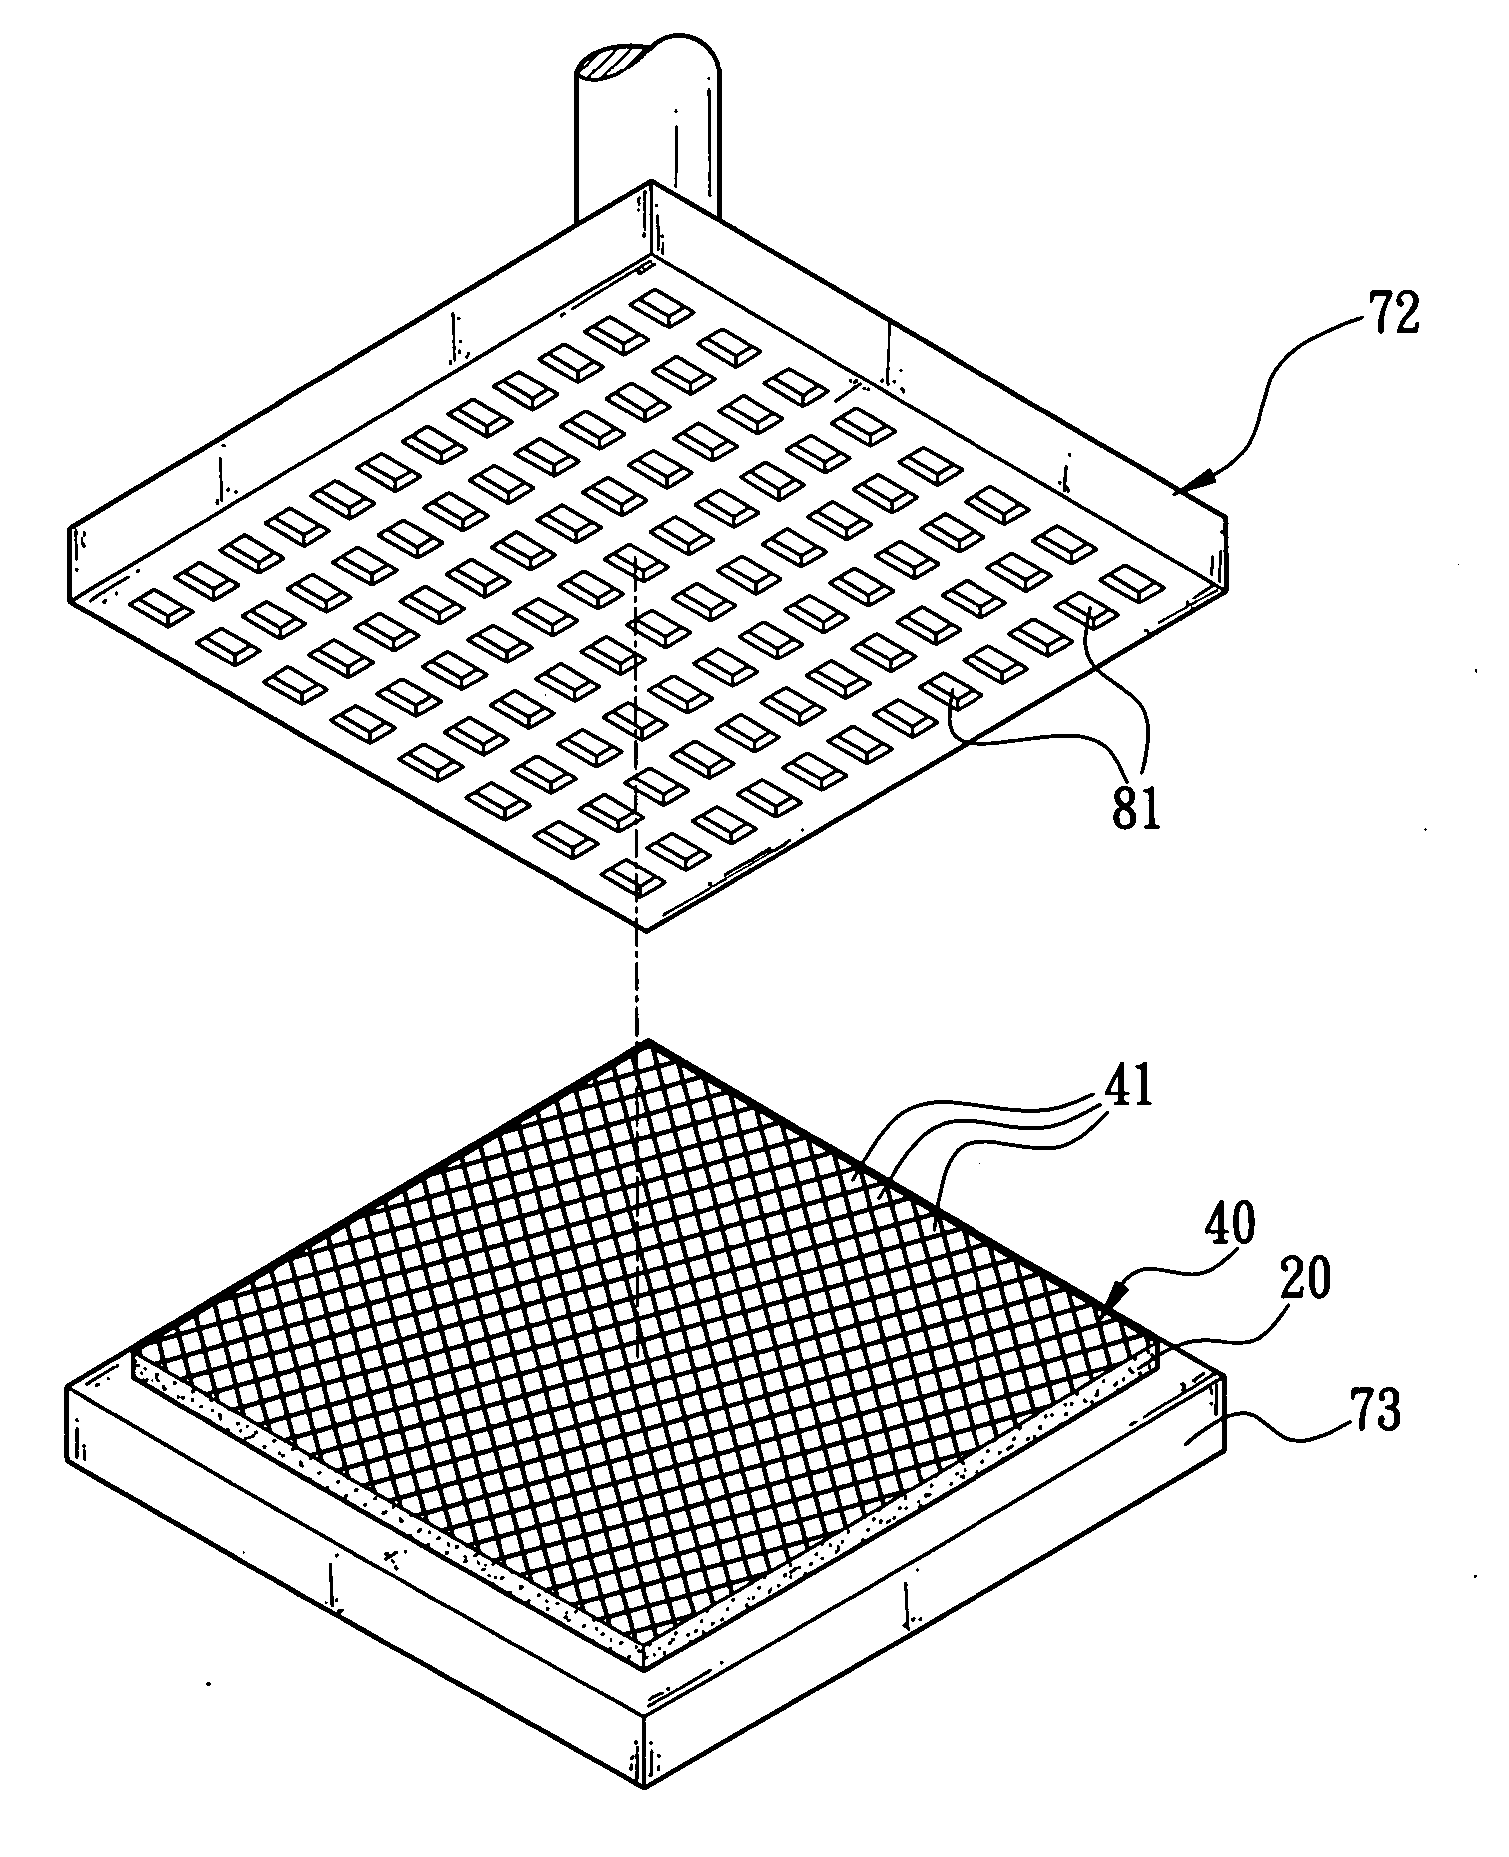 Method for manufacturing slippery-proof foam materials having protruded threads